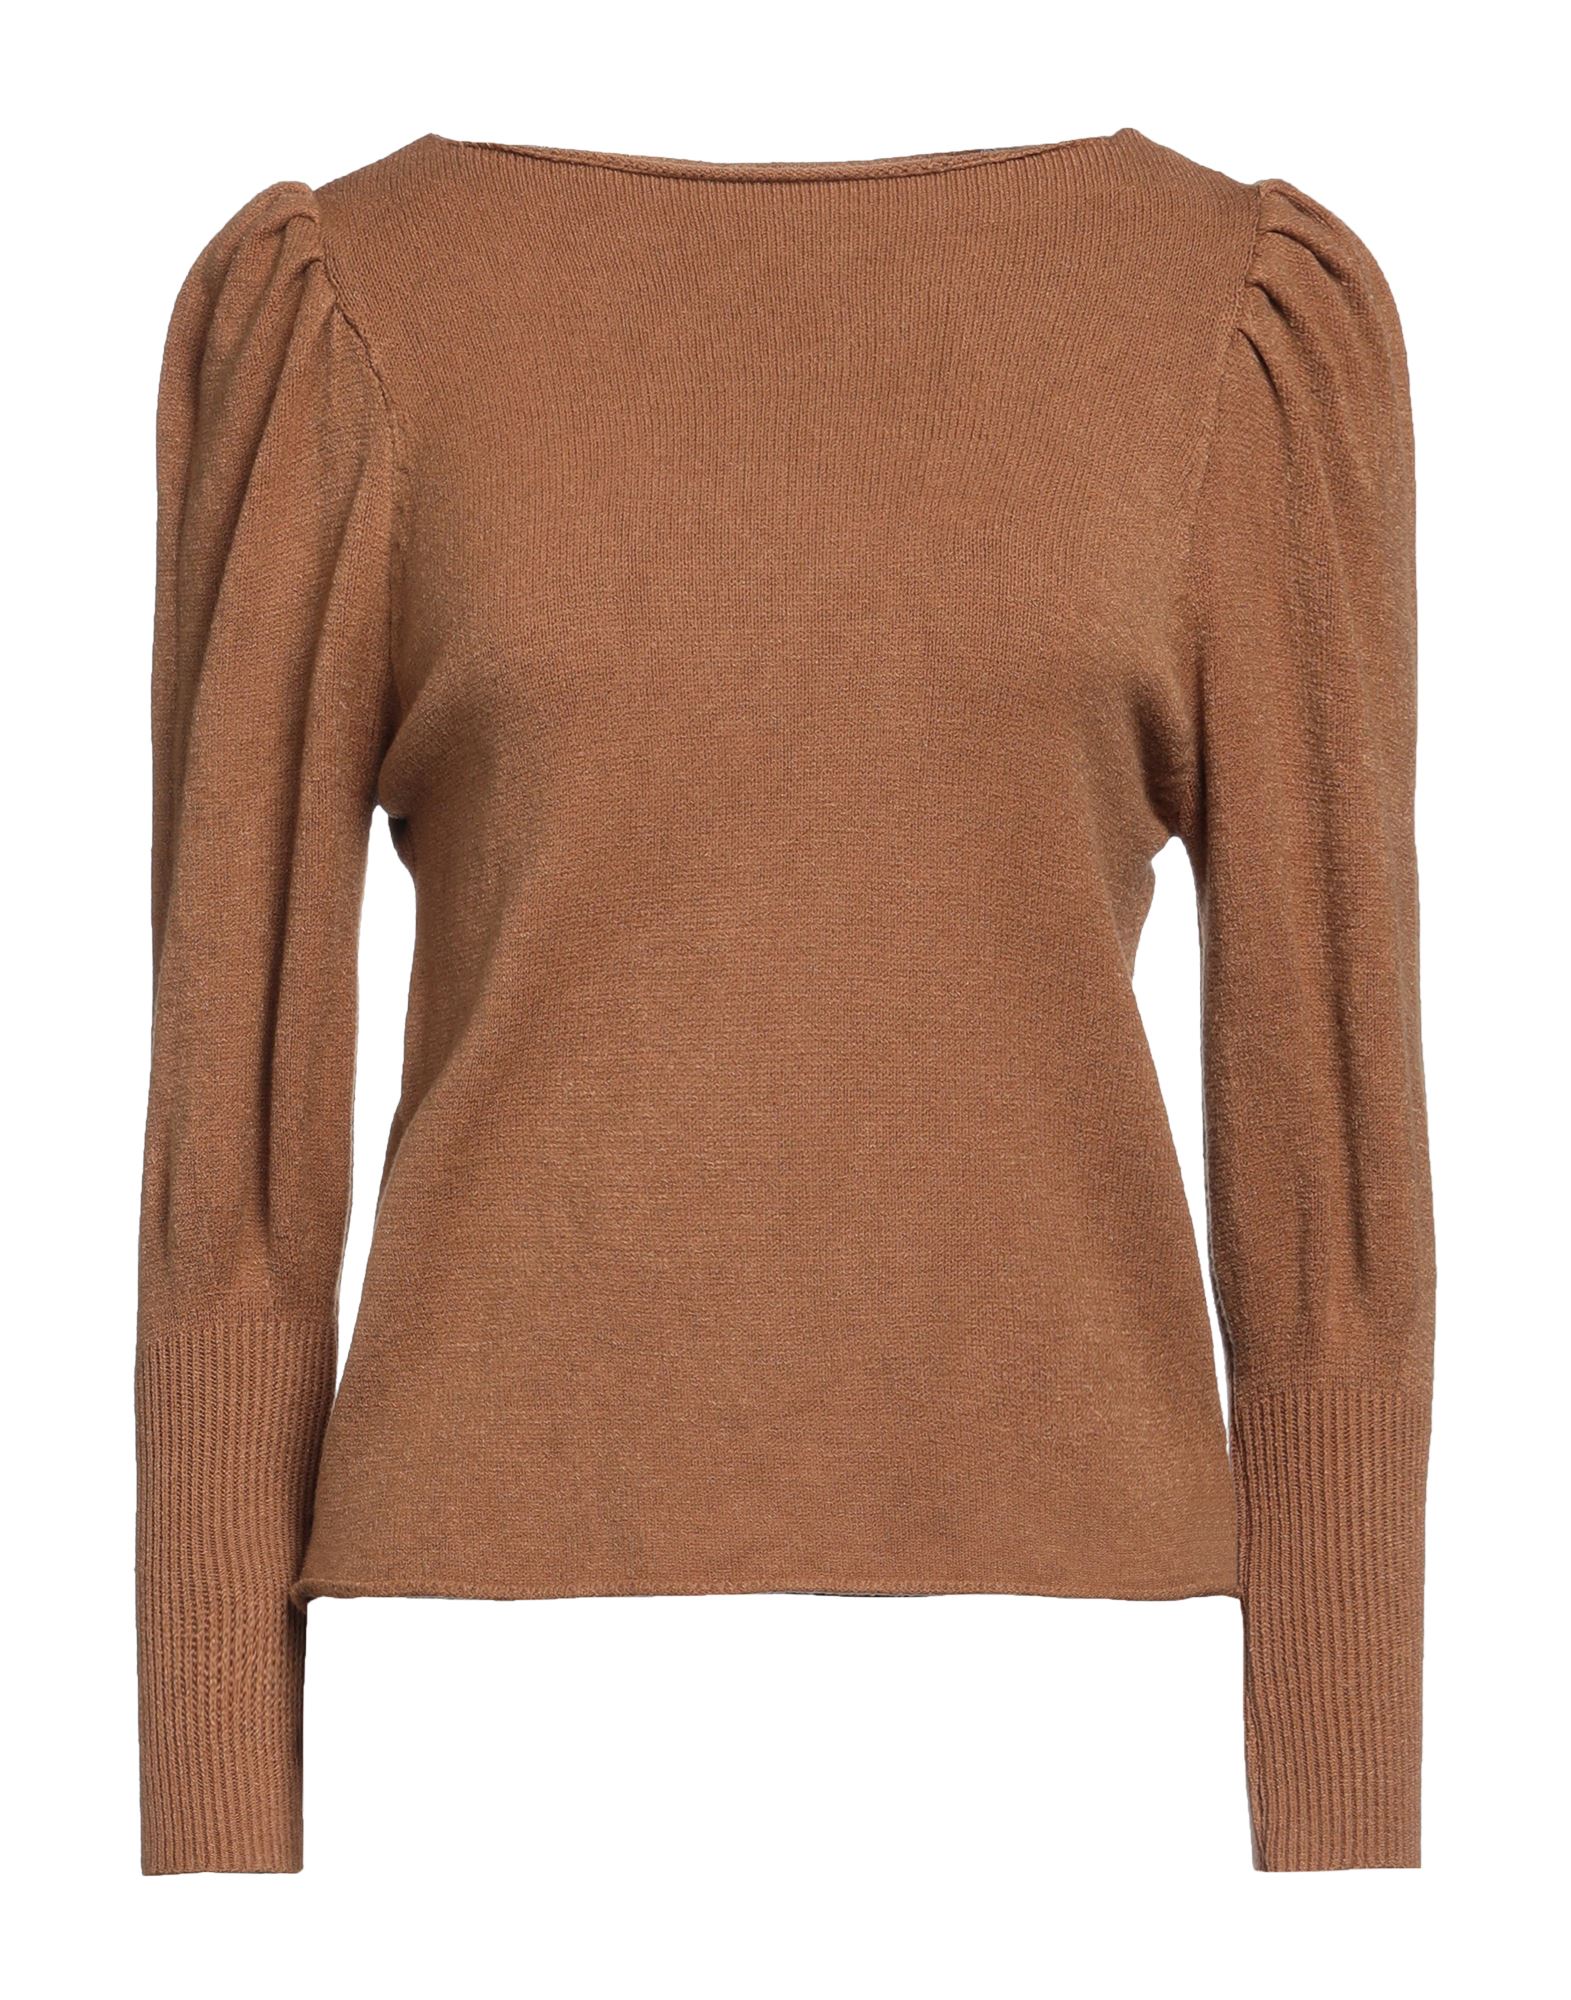 Amelie Rêveur Woman Sweater Camel Size M/l Viscose, Polyester, Polyamide In Beige